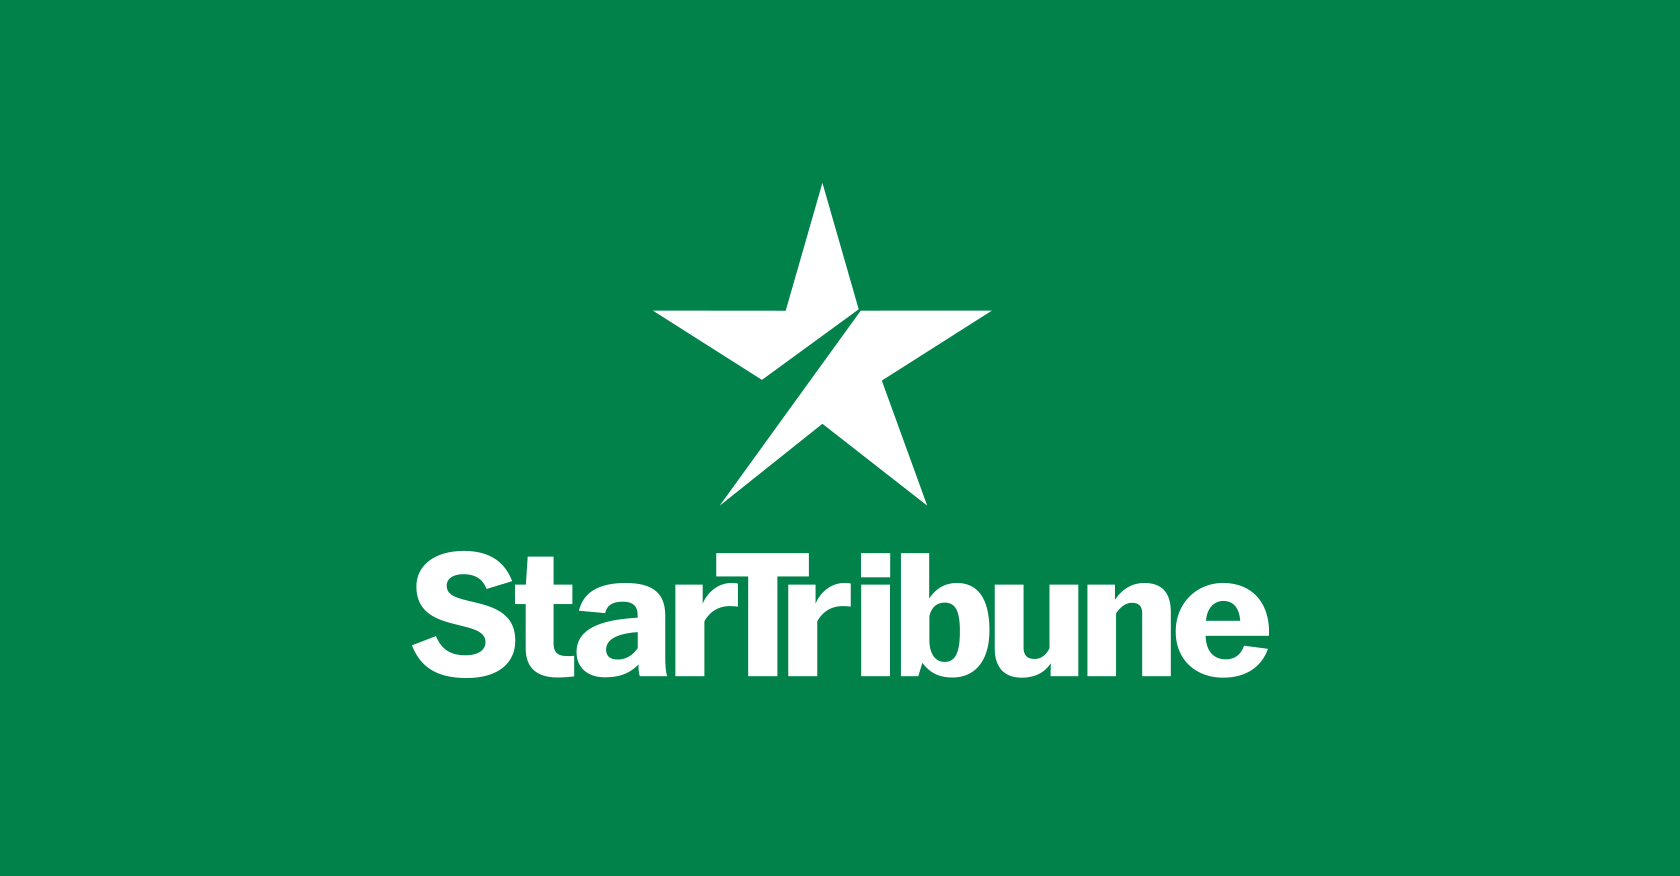 http://www.startribune.com/move-over-401-k-side-hustles-are-becoming-key-retirement-issue/420015433/